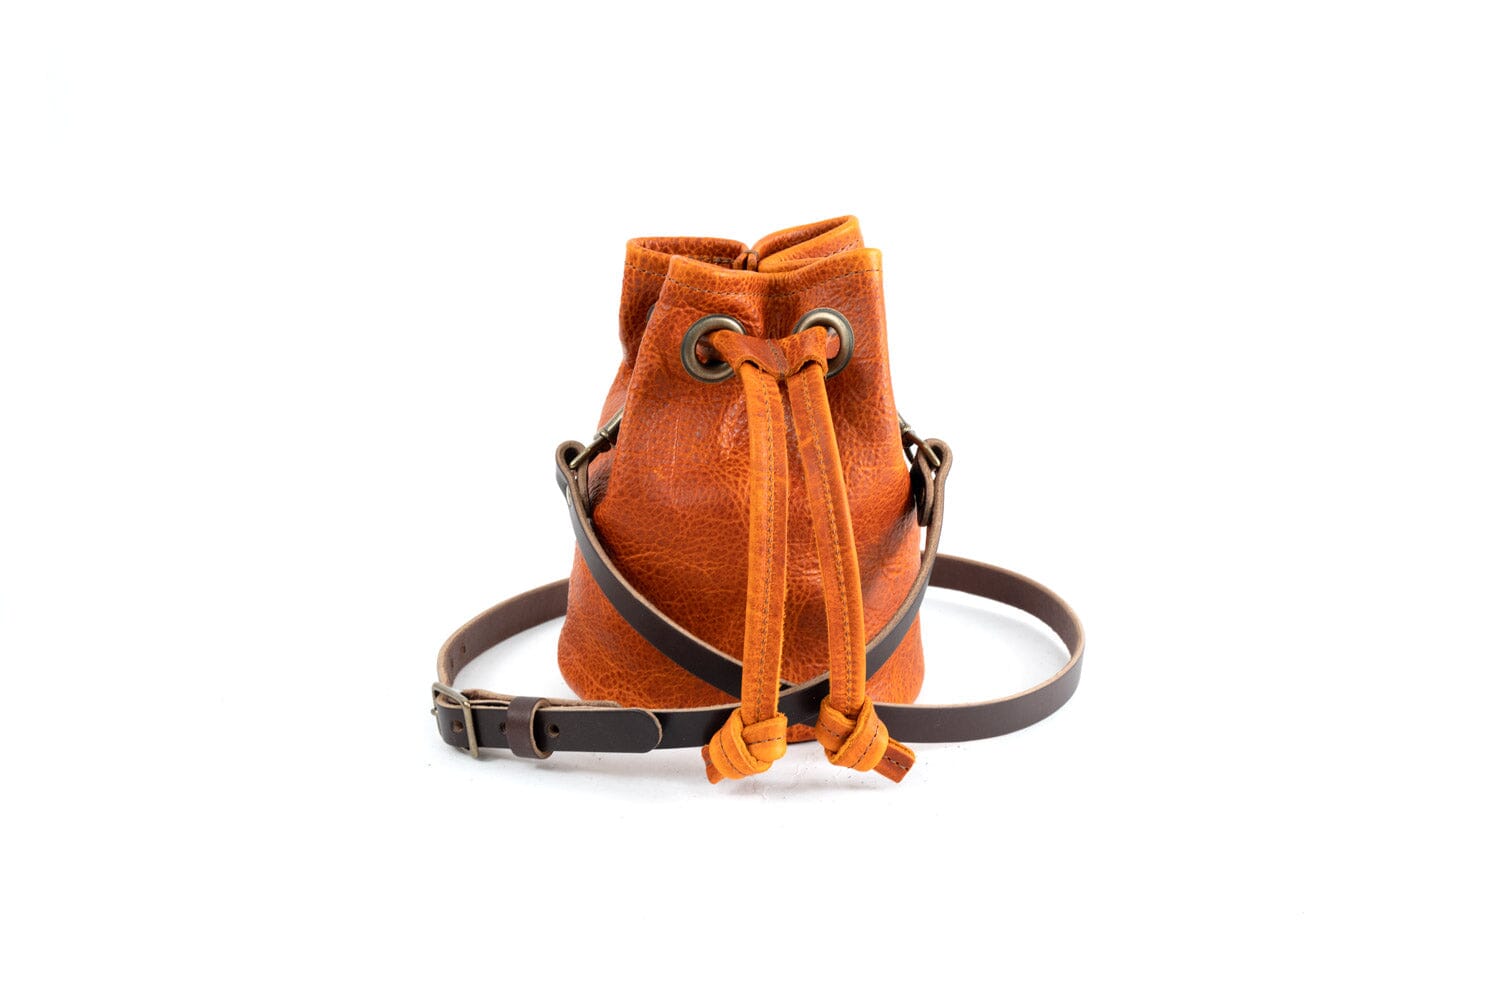 Go Forth Goods Leather Bucket Bag - Large - Cherry Bison